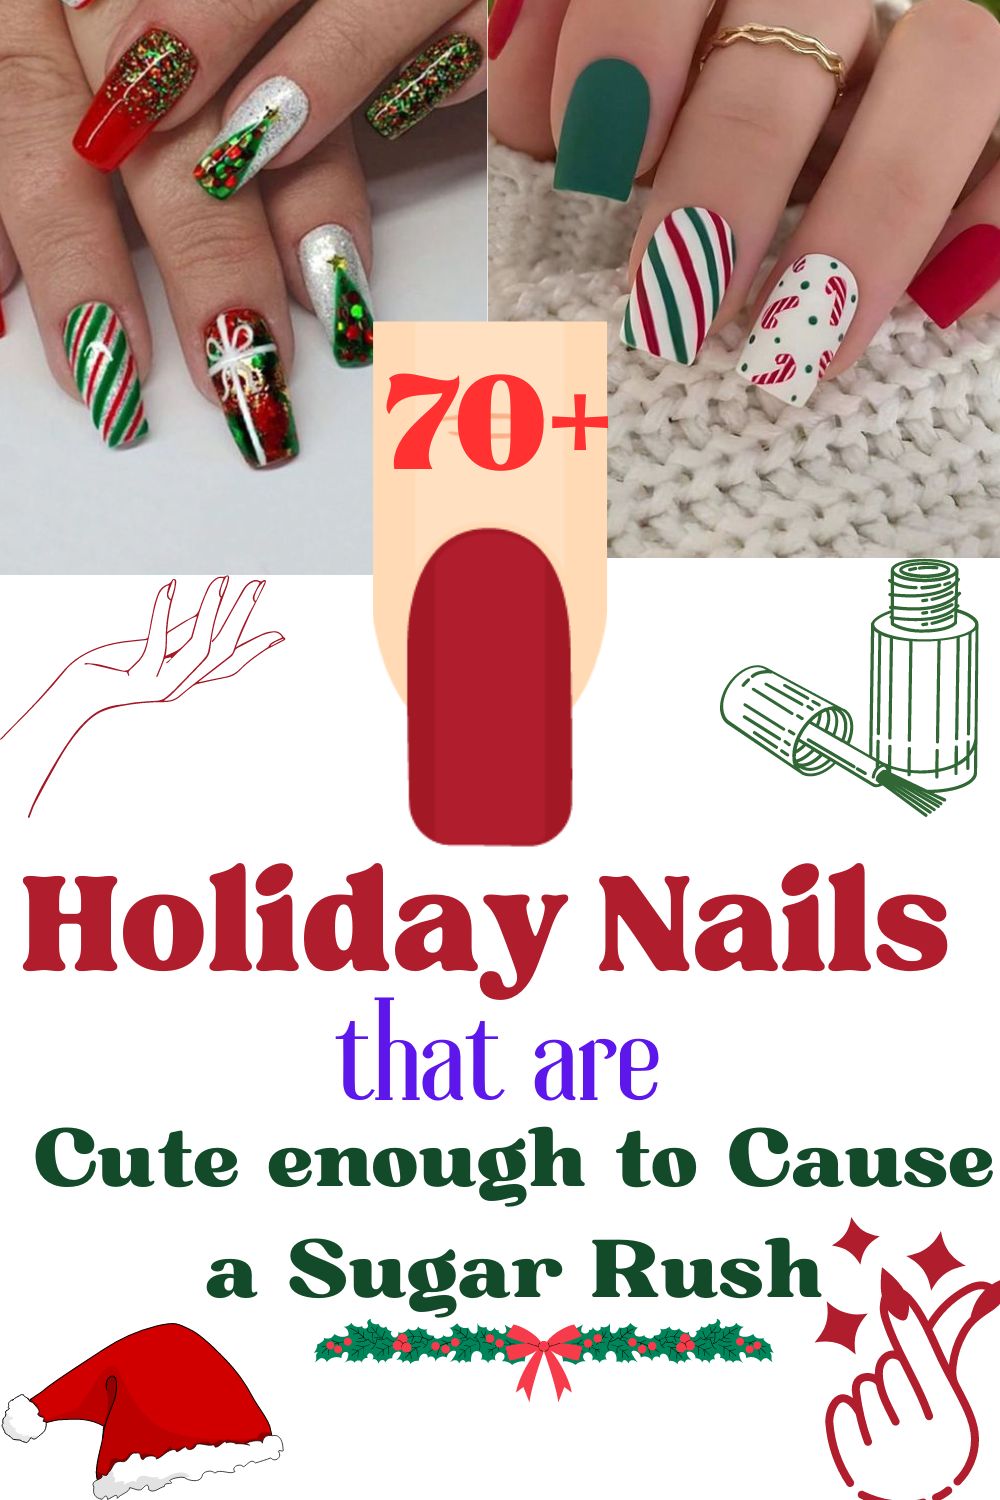 12 Gorgeous Christmas Nail Designs to Set the Mood for 12/22! – Faces Canada